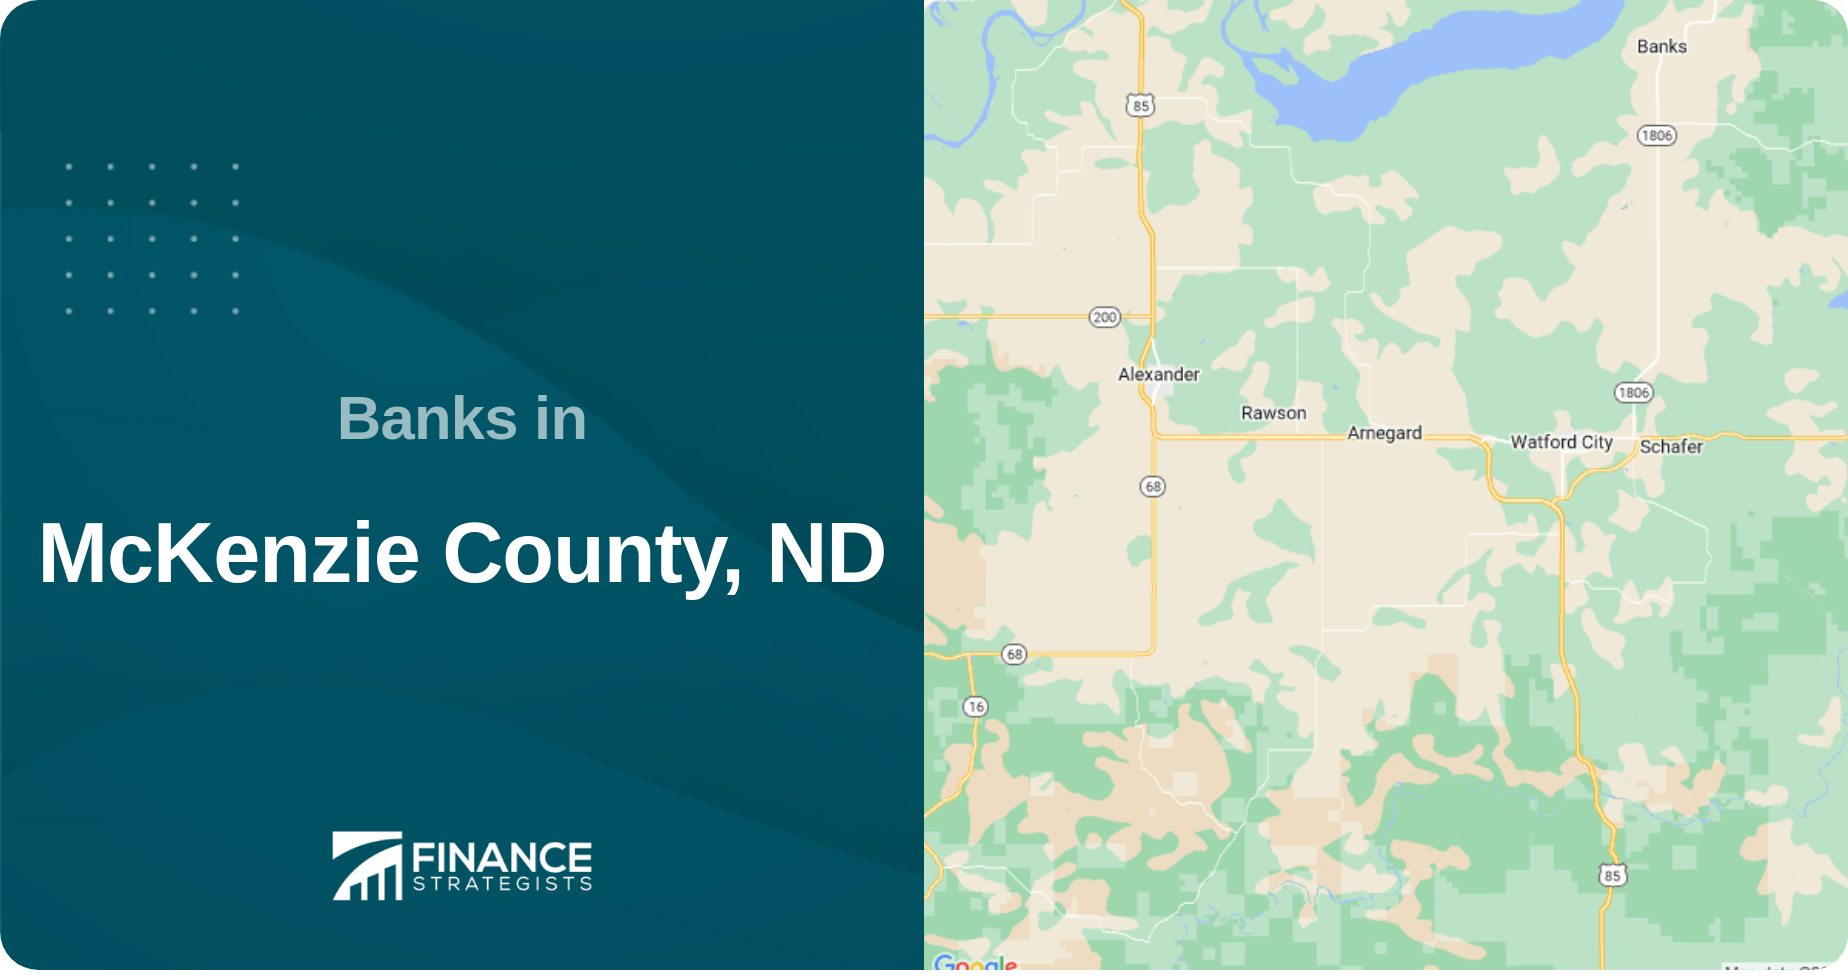 Banks in McKenzie County, ND